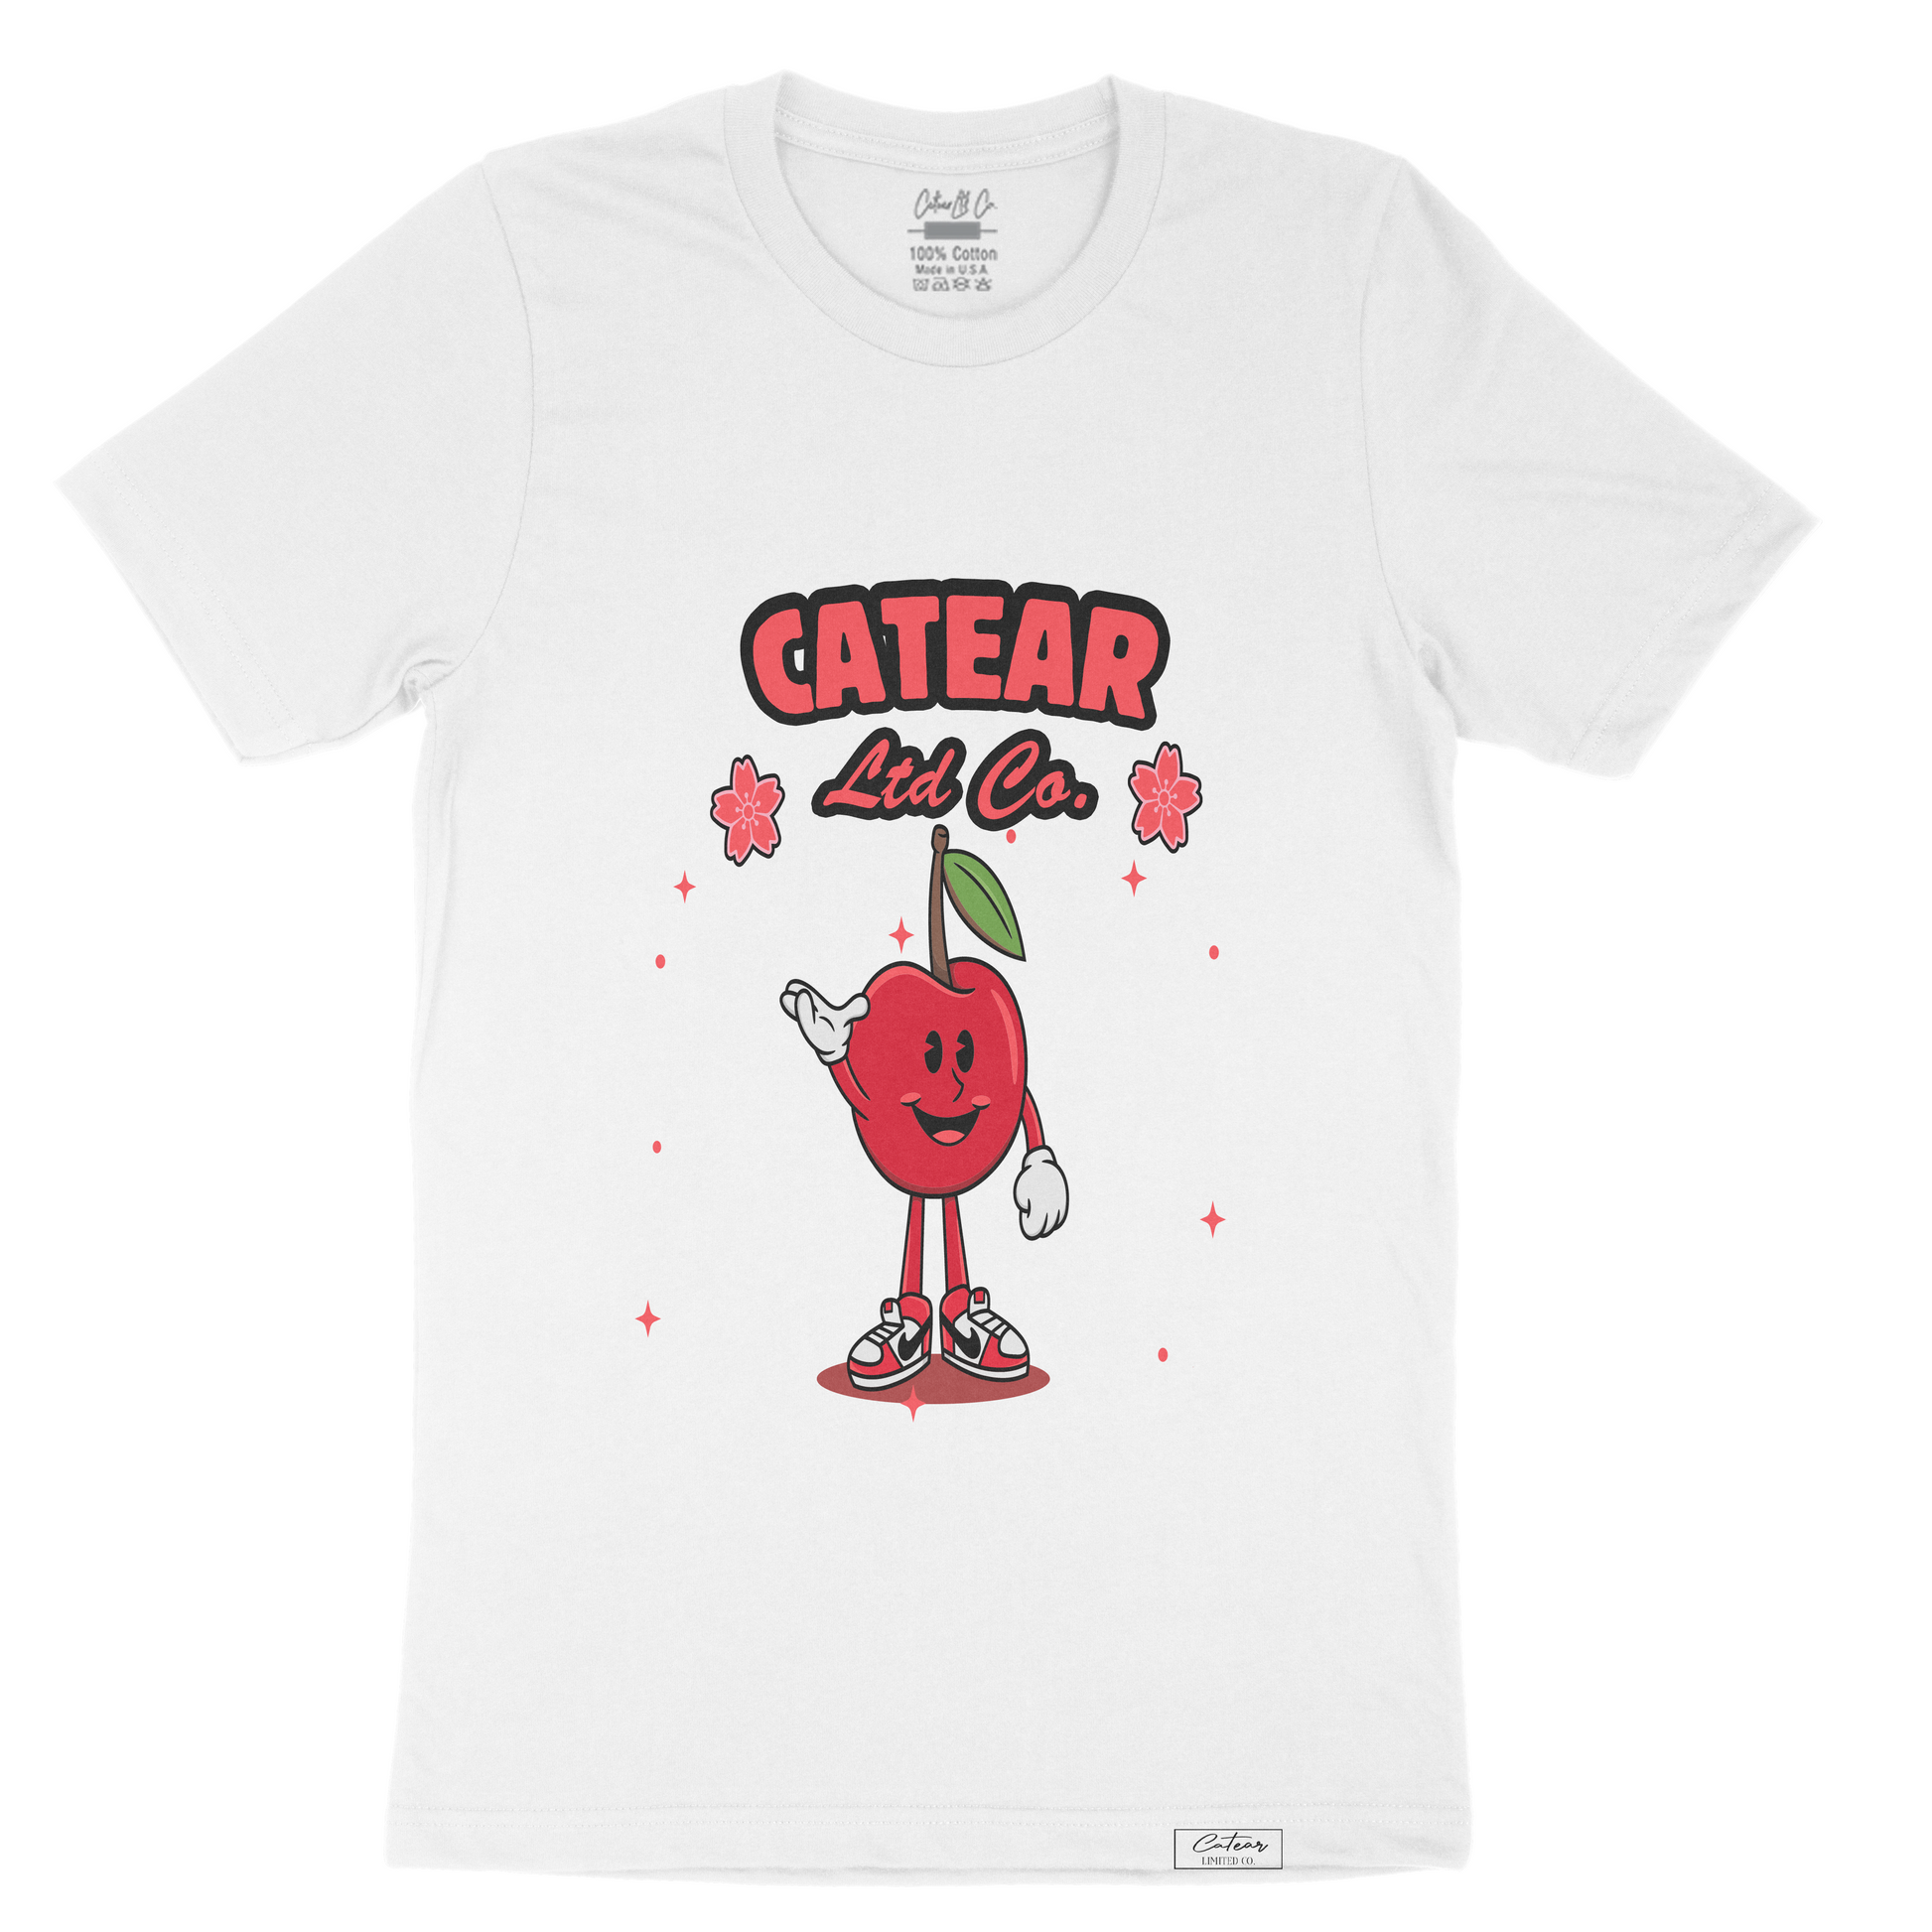 Unisex white color tee with hand-drawn cherry mascot screen printed on the front, woven label on bottom left 100% Cotton. Relaxed fit & great feel.